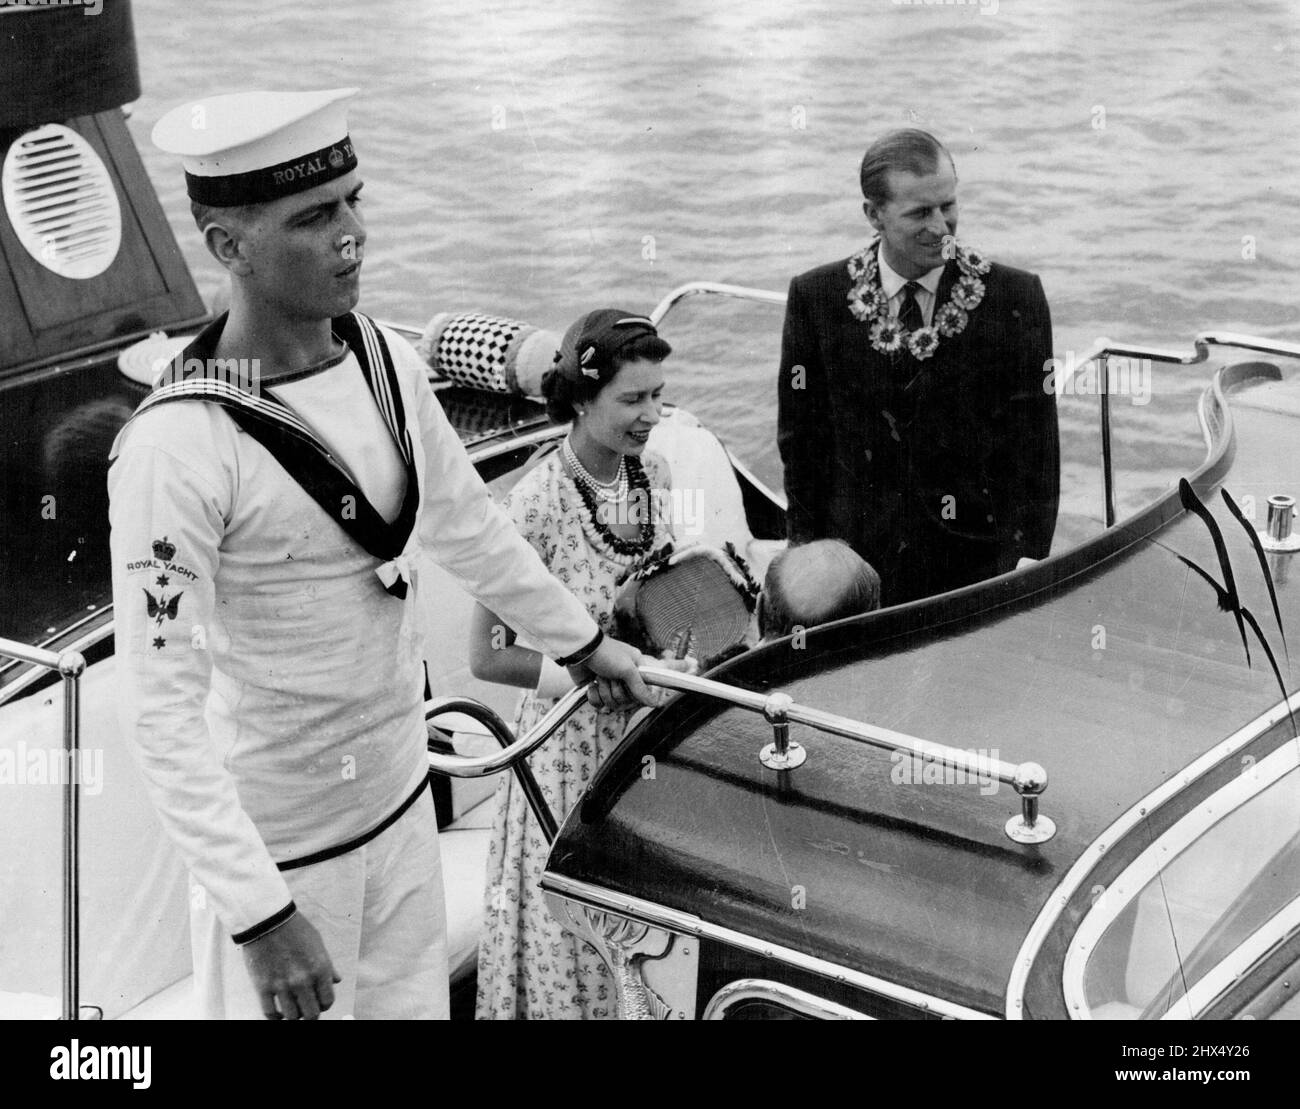 Queen Elizabeth in Tonga - A sad farewell. Queen Elizabeth and the Duke of Edinburgh wore Tongon leis as they stepped into the Royal barge to return to the Gotchic, their visit to the Island Kingdom of Tonga ended. February 03, 1954. Stock Photo